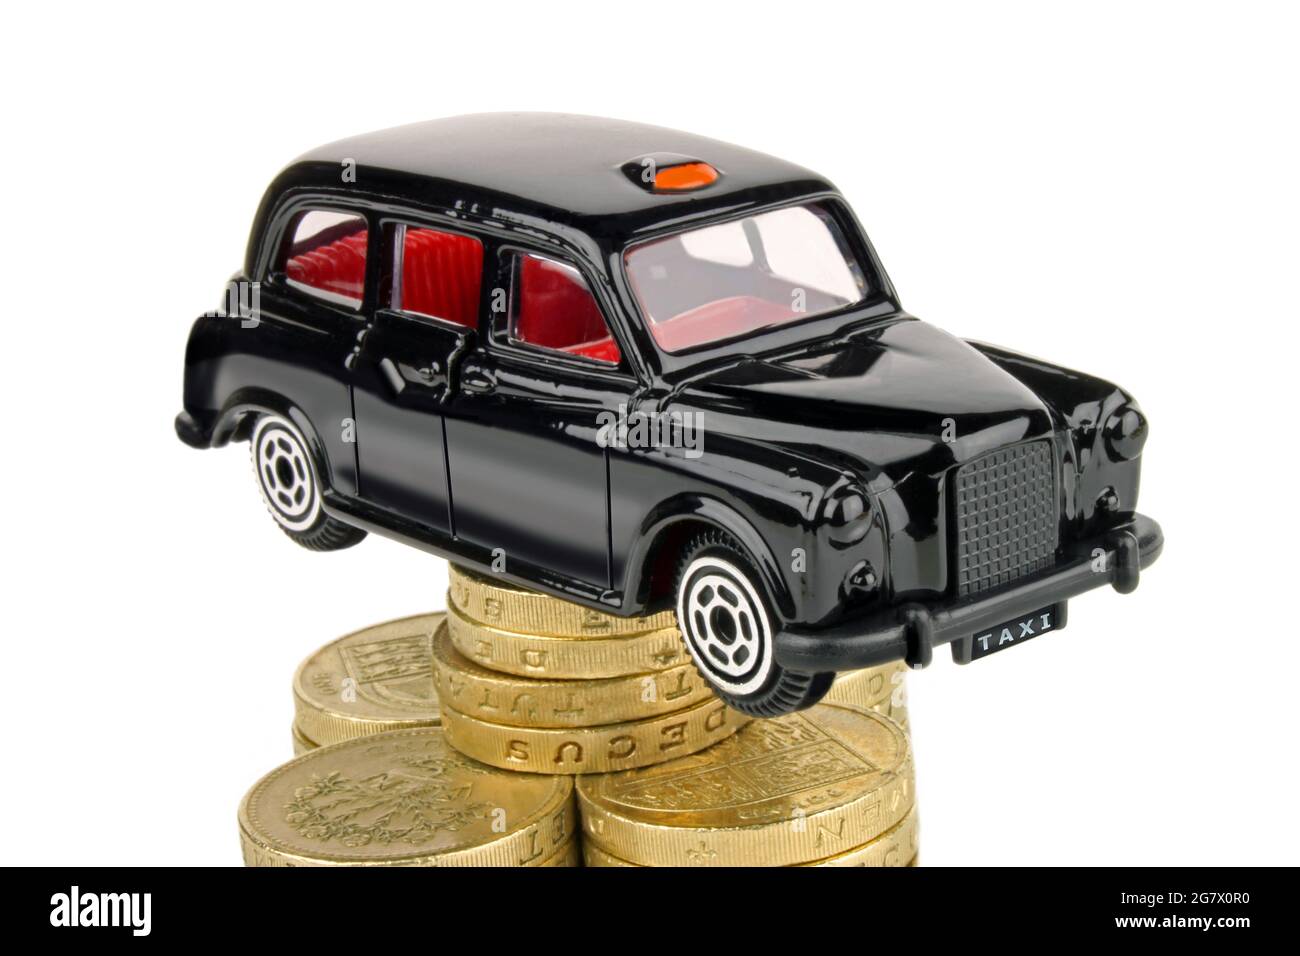 A London black Taxi cab on coins. Stock Photo